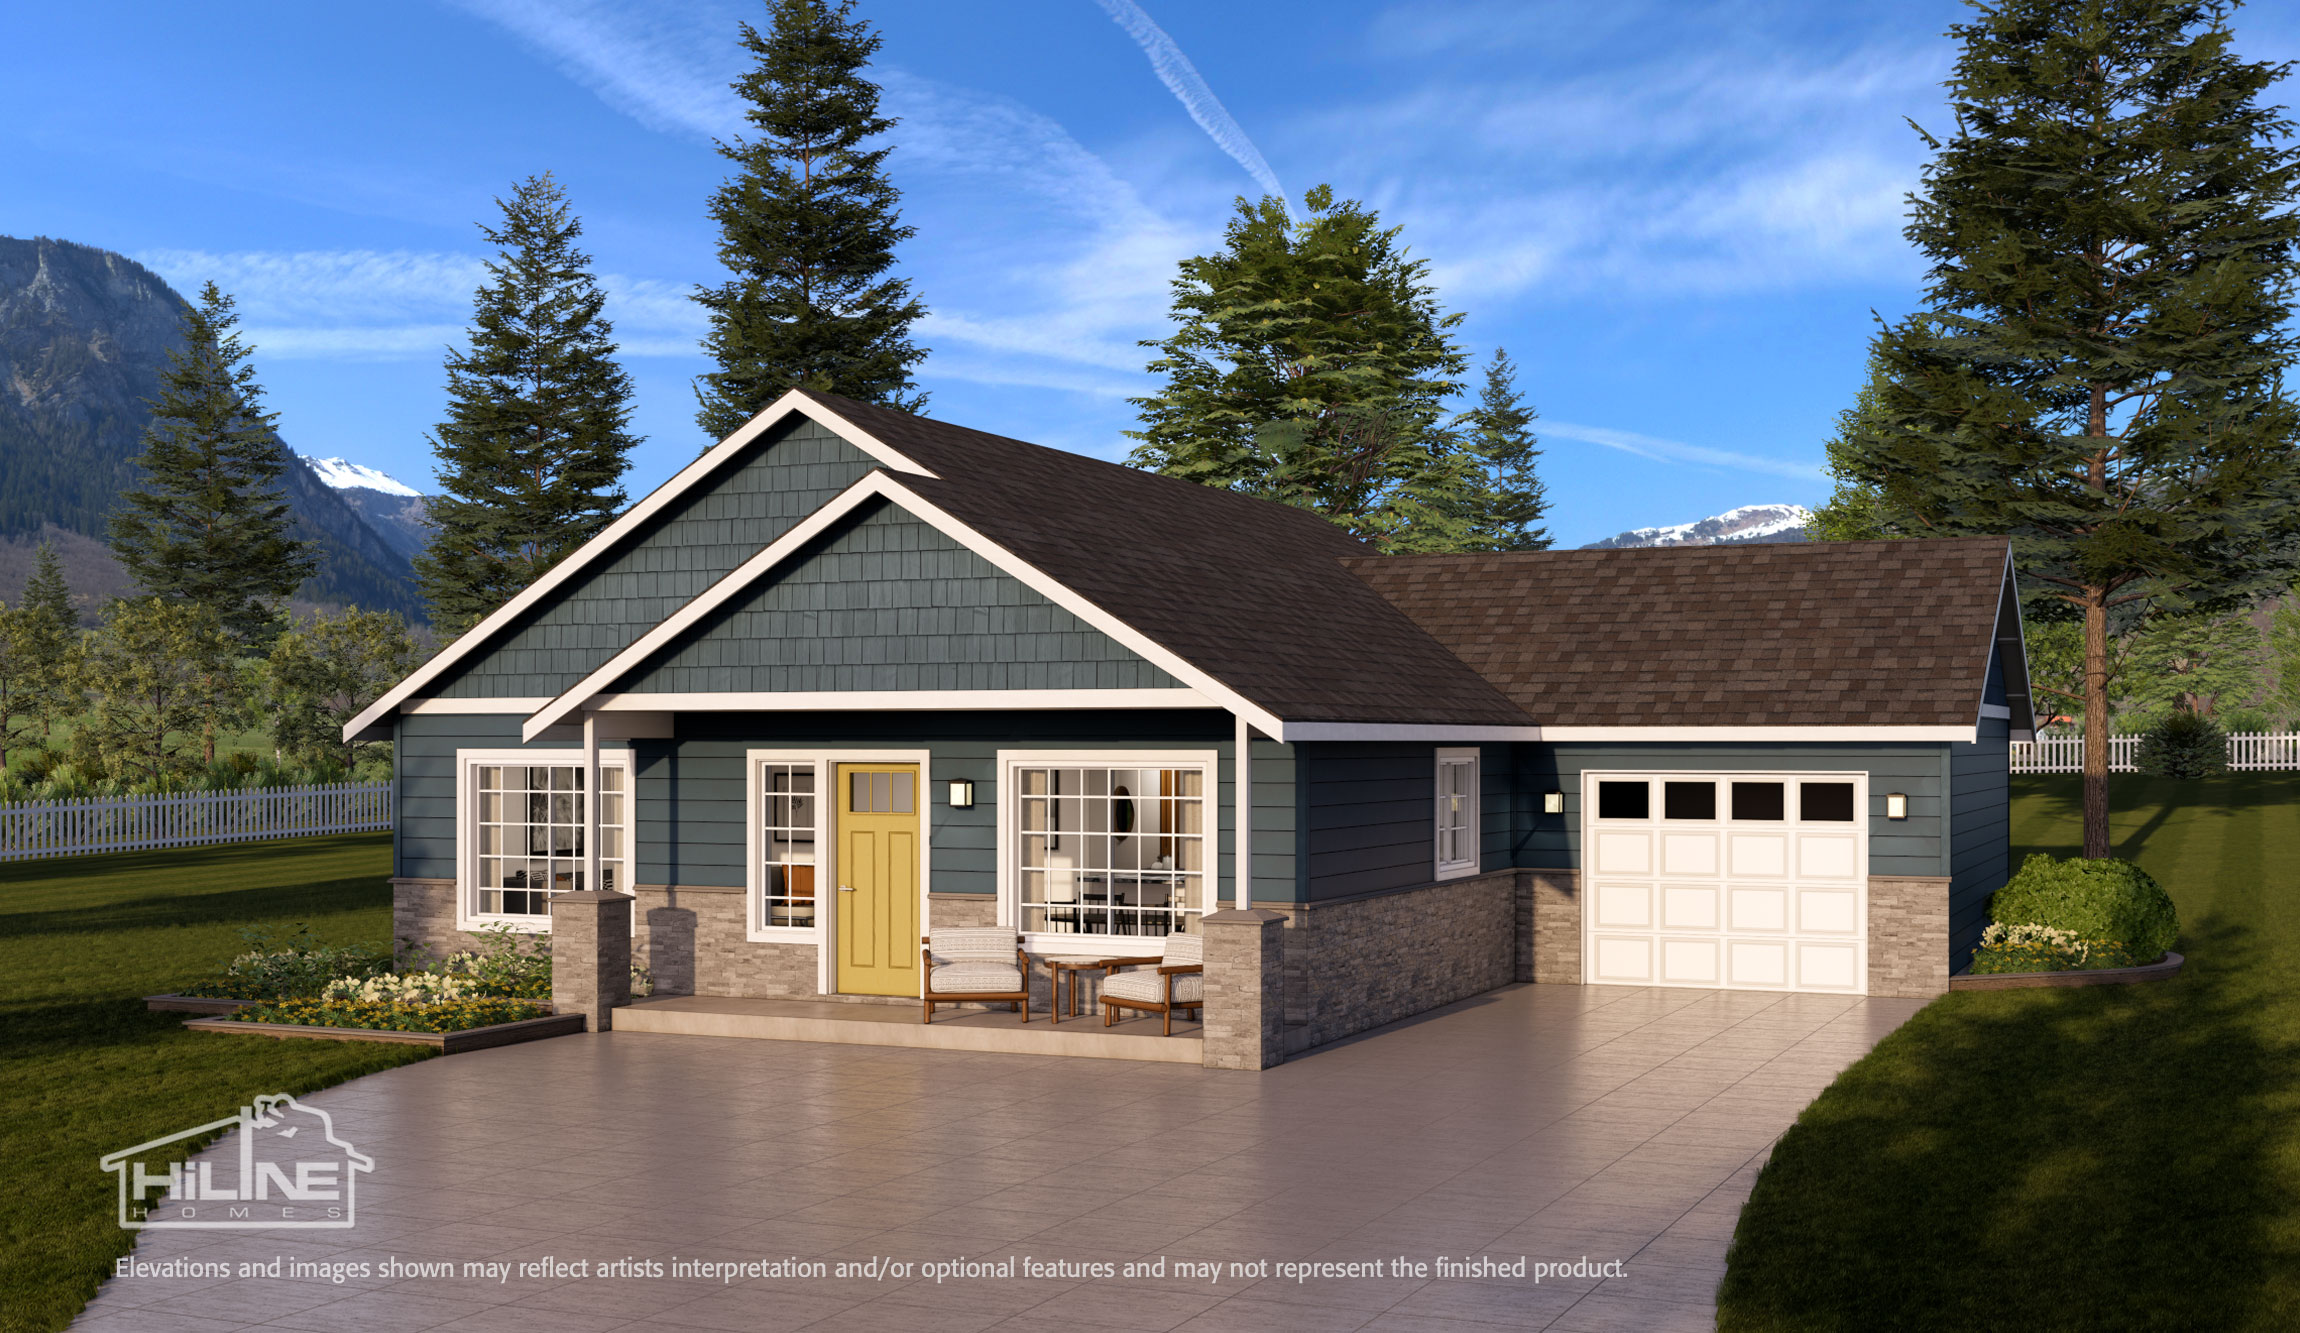 Image of HiLine Home Plan 1200 Optional Rendering.